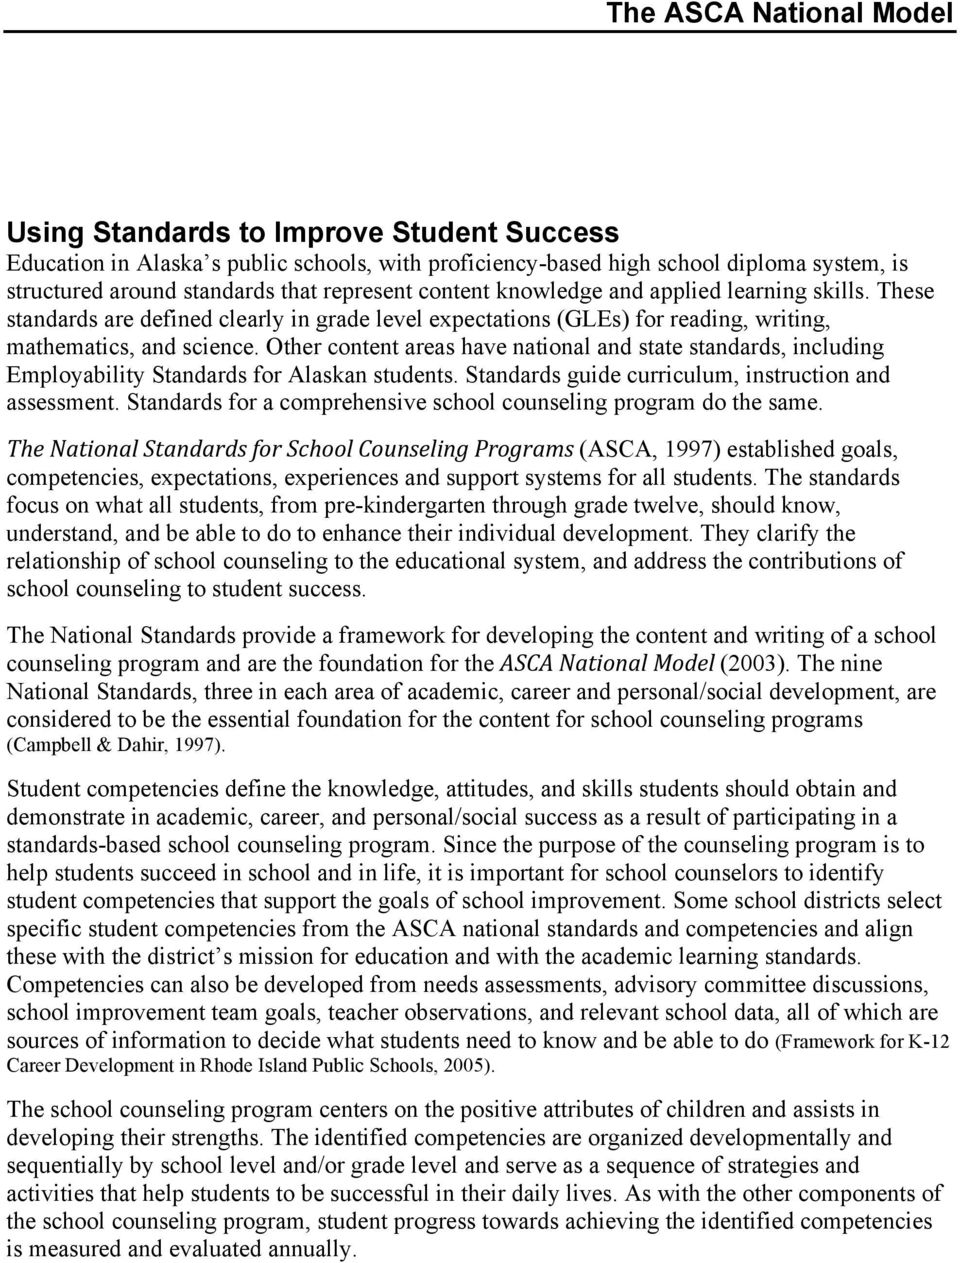 Other content areas have national and state standards, including Employability Standards for Alaskan students. Standards guide curriculum, instruction and assessment.